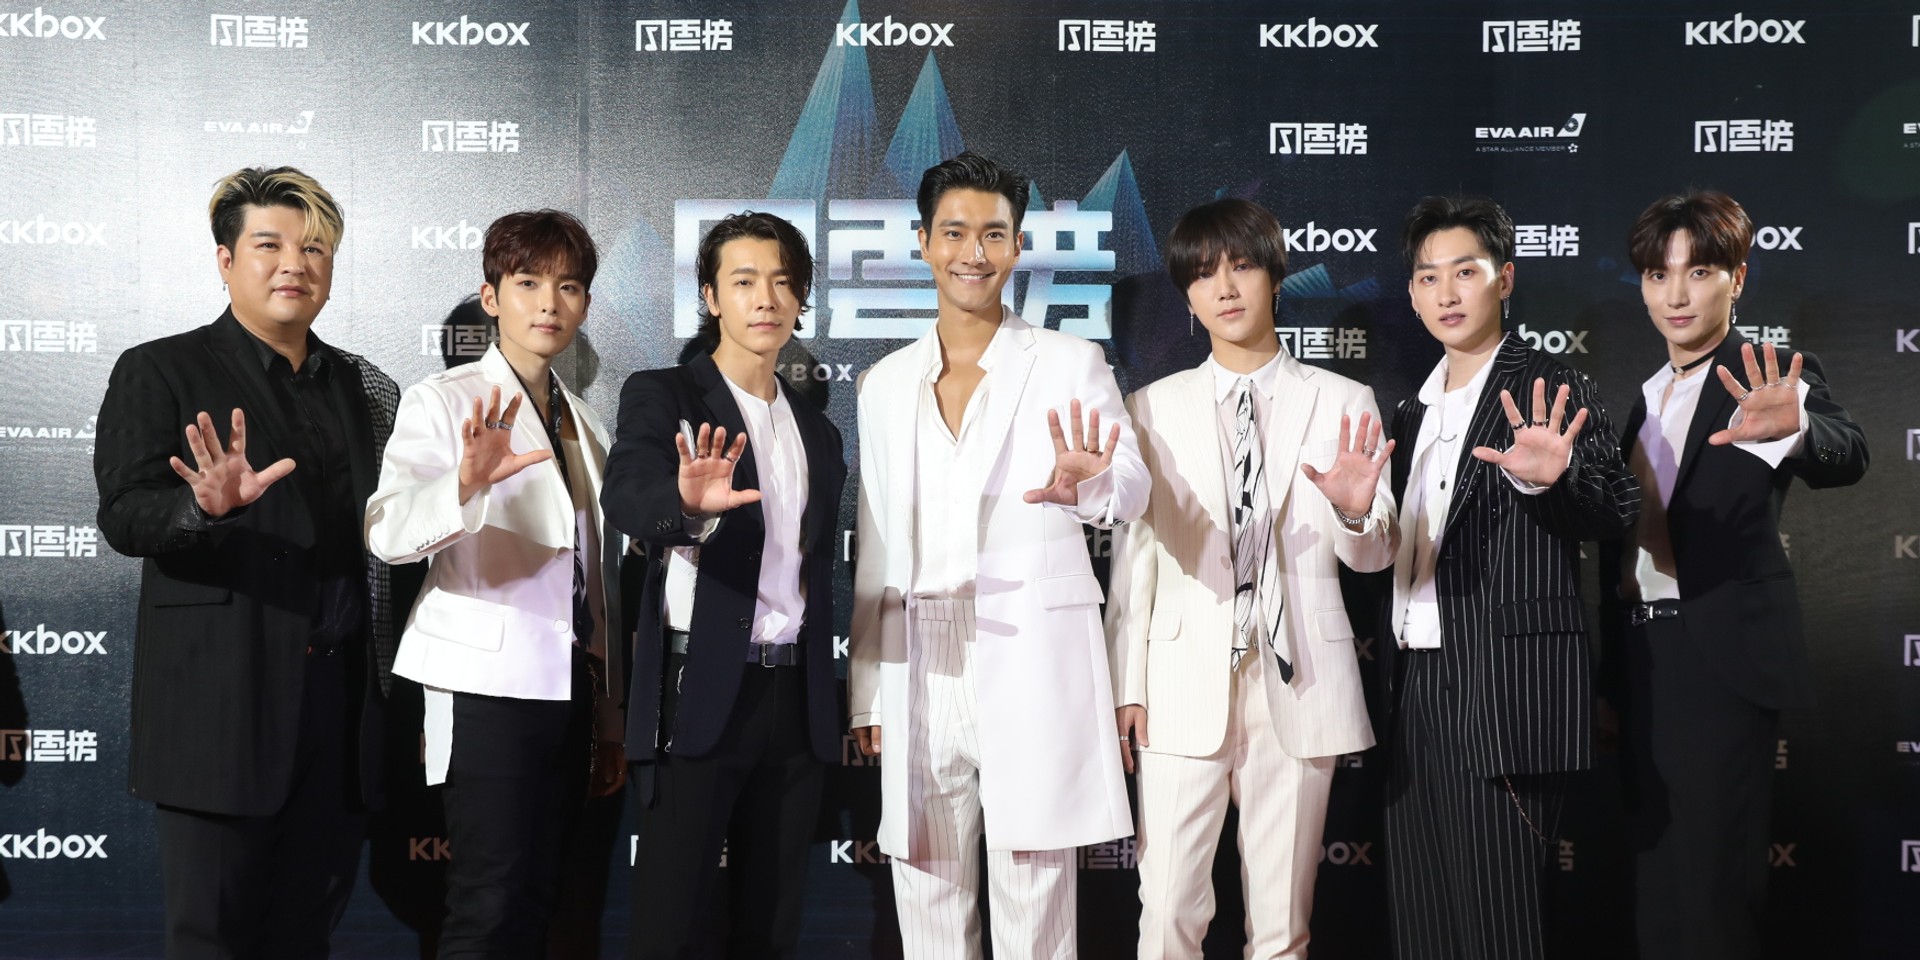 Highlights from the 2019 KKBOX Music Awards 